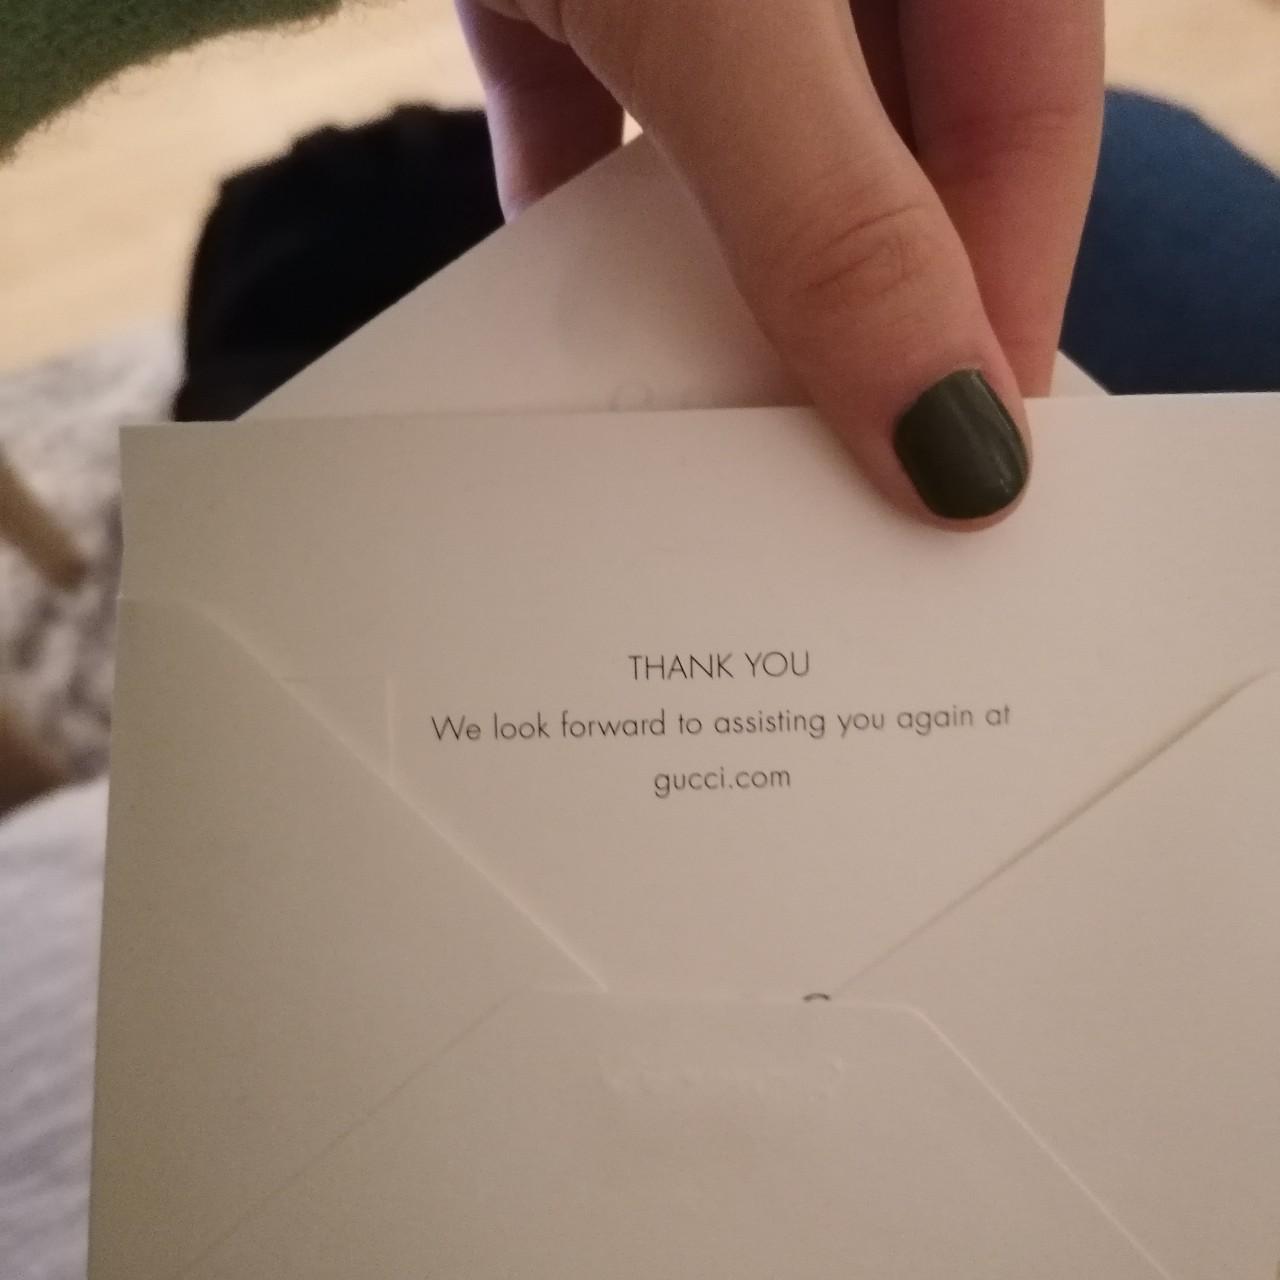 Gucci Envelope with Thank You Card